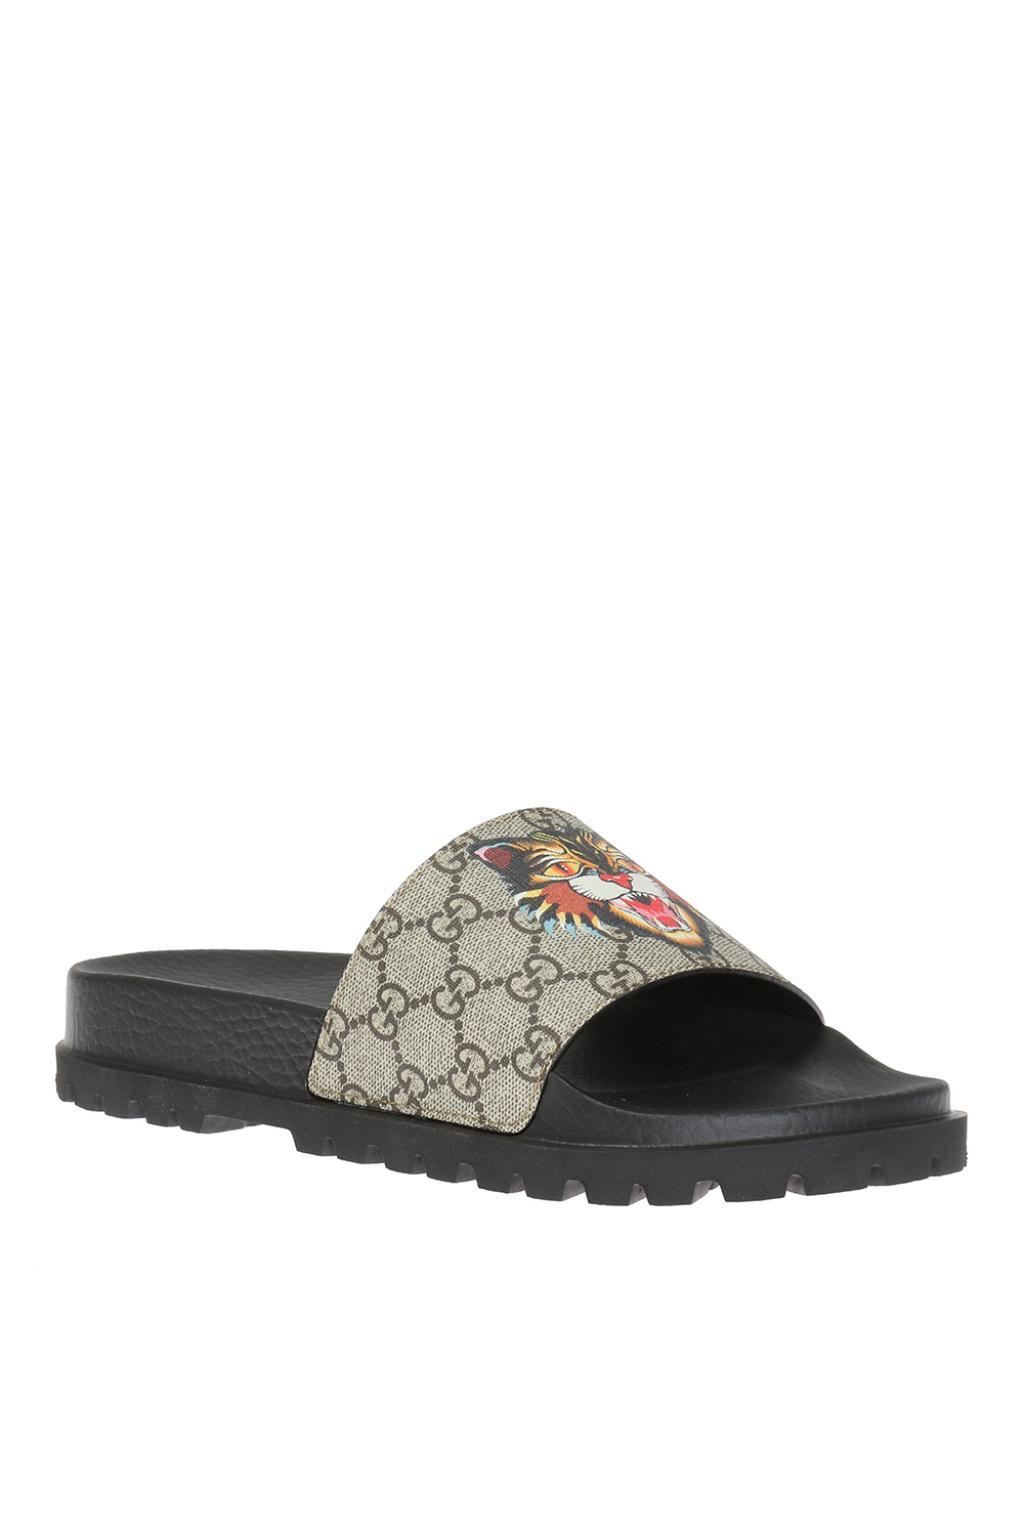 gucci slides with lion, OFF 79%,www 